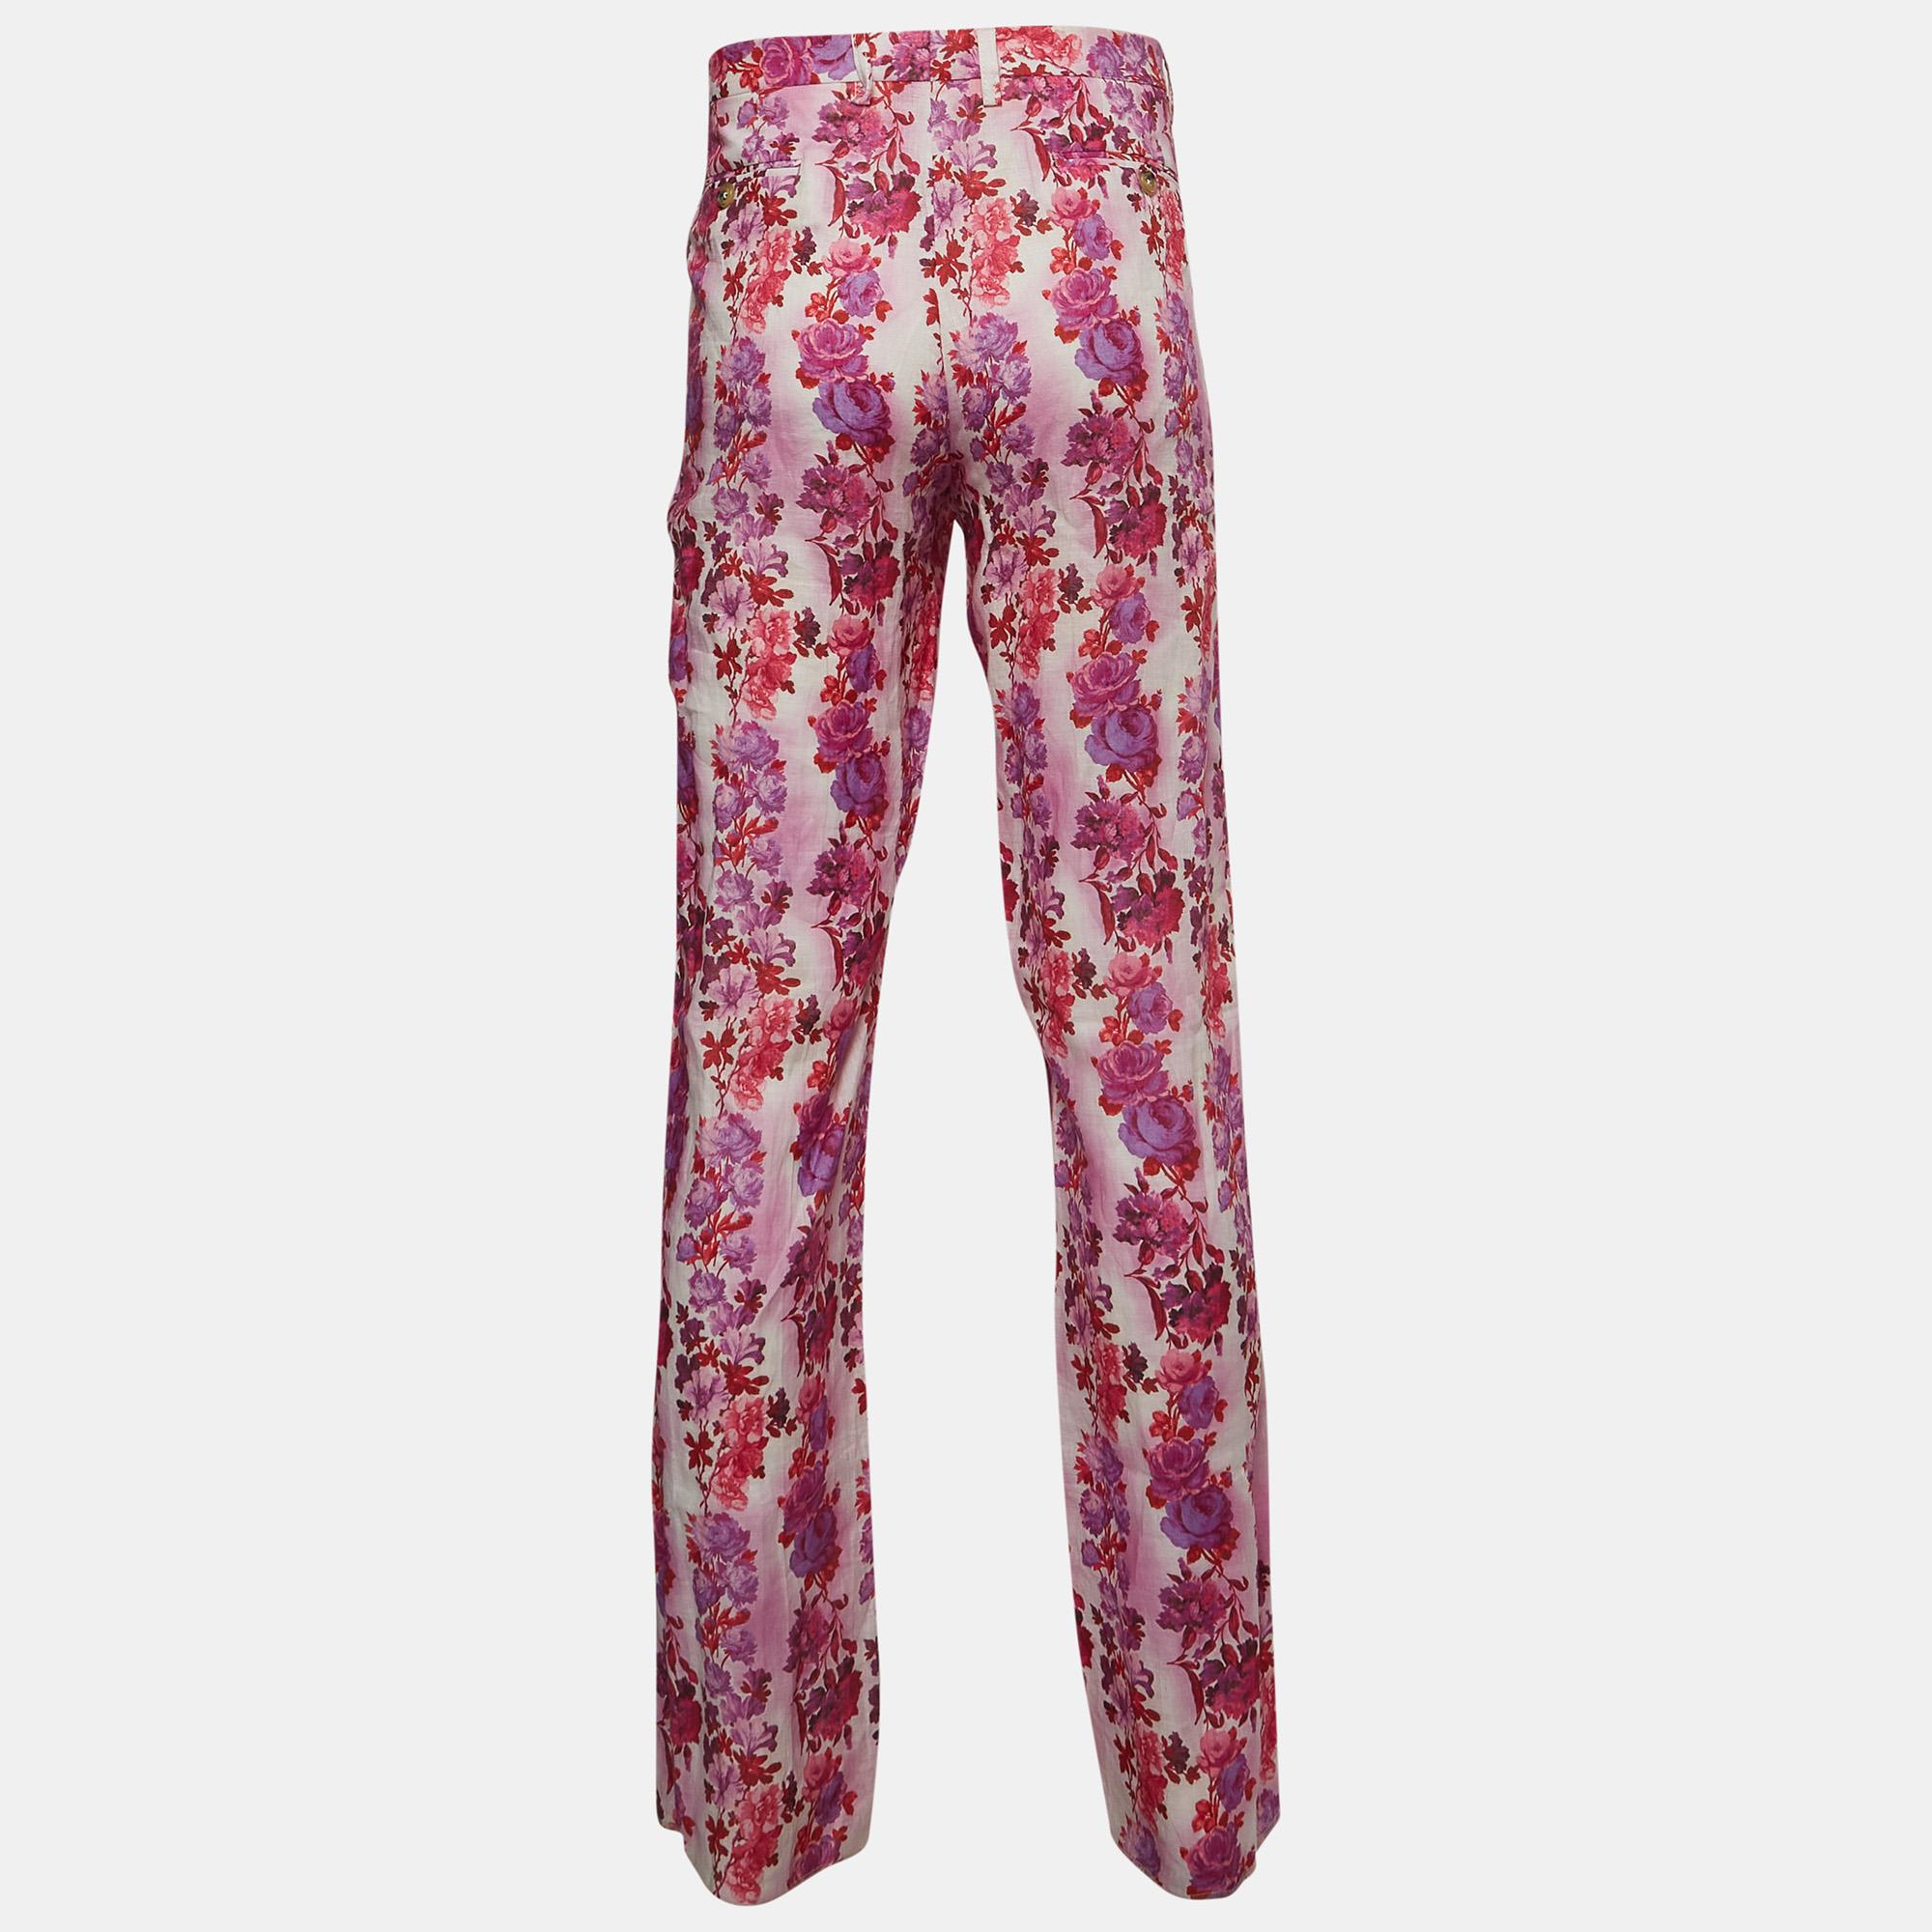 Crafted with care, the Etro pants exude charm and comfort. Delicate pink blooms dance across breathable linen, offering a graceful touch. Tailored to perfection, these pants boast a straight fit, ensuring both style and ease. Embrace timeless